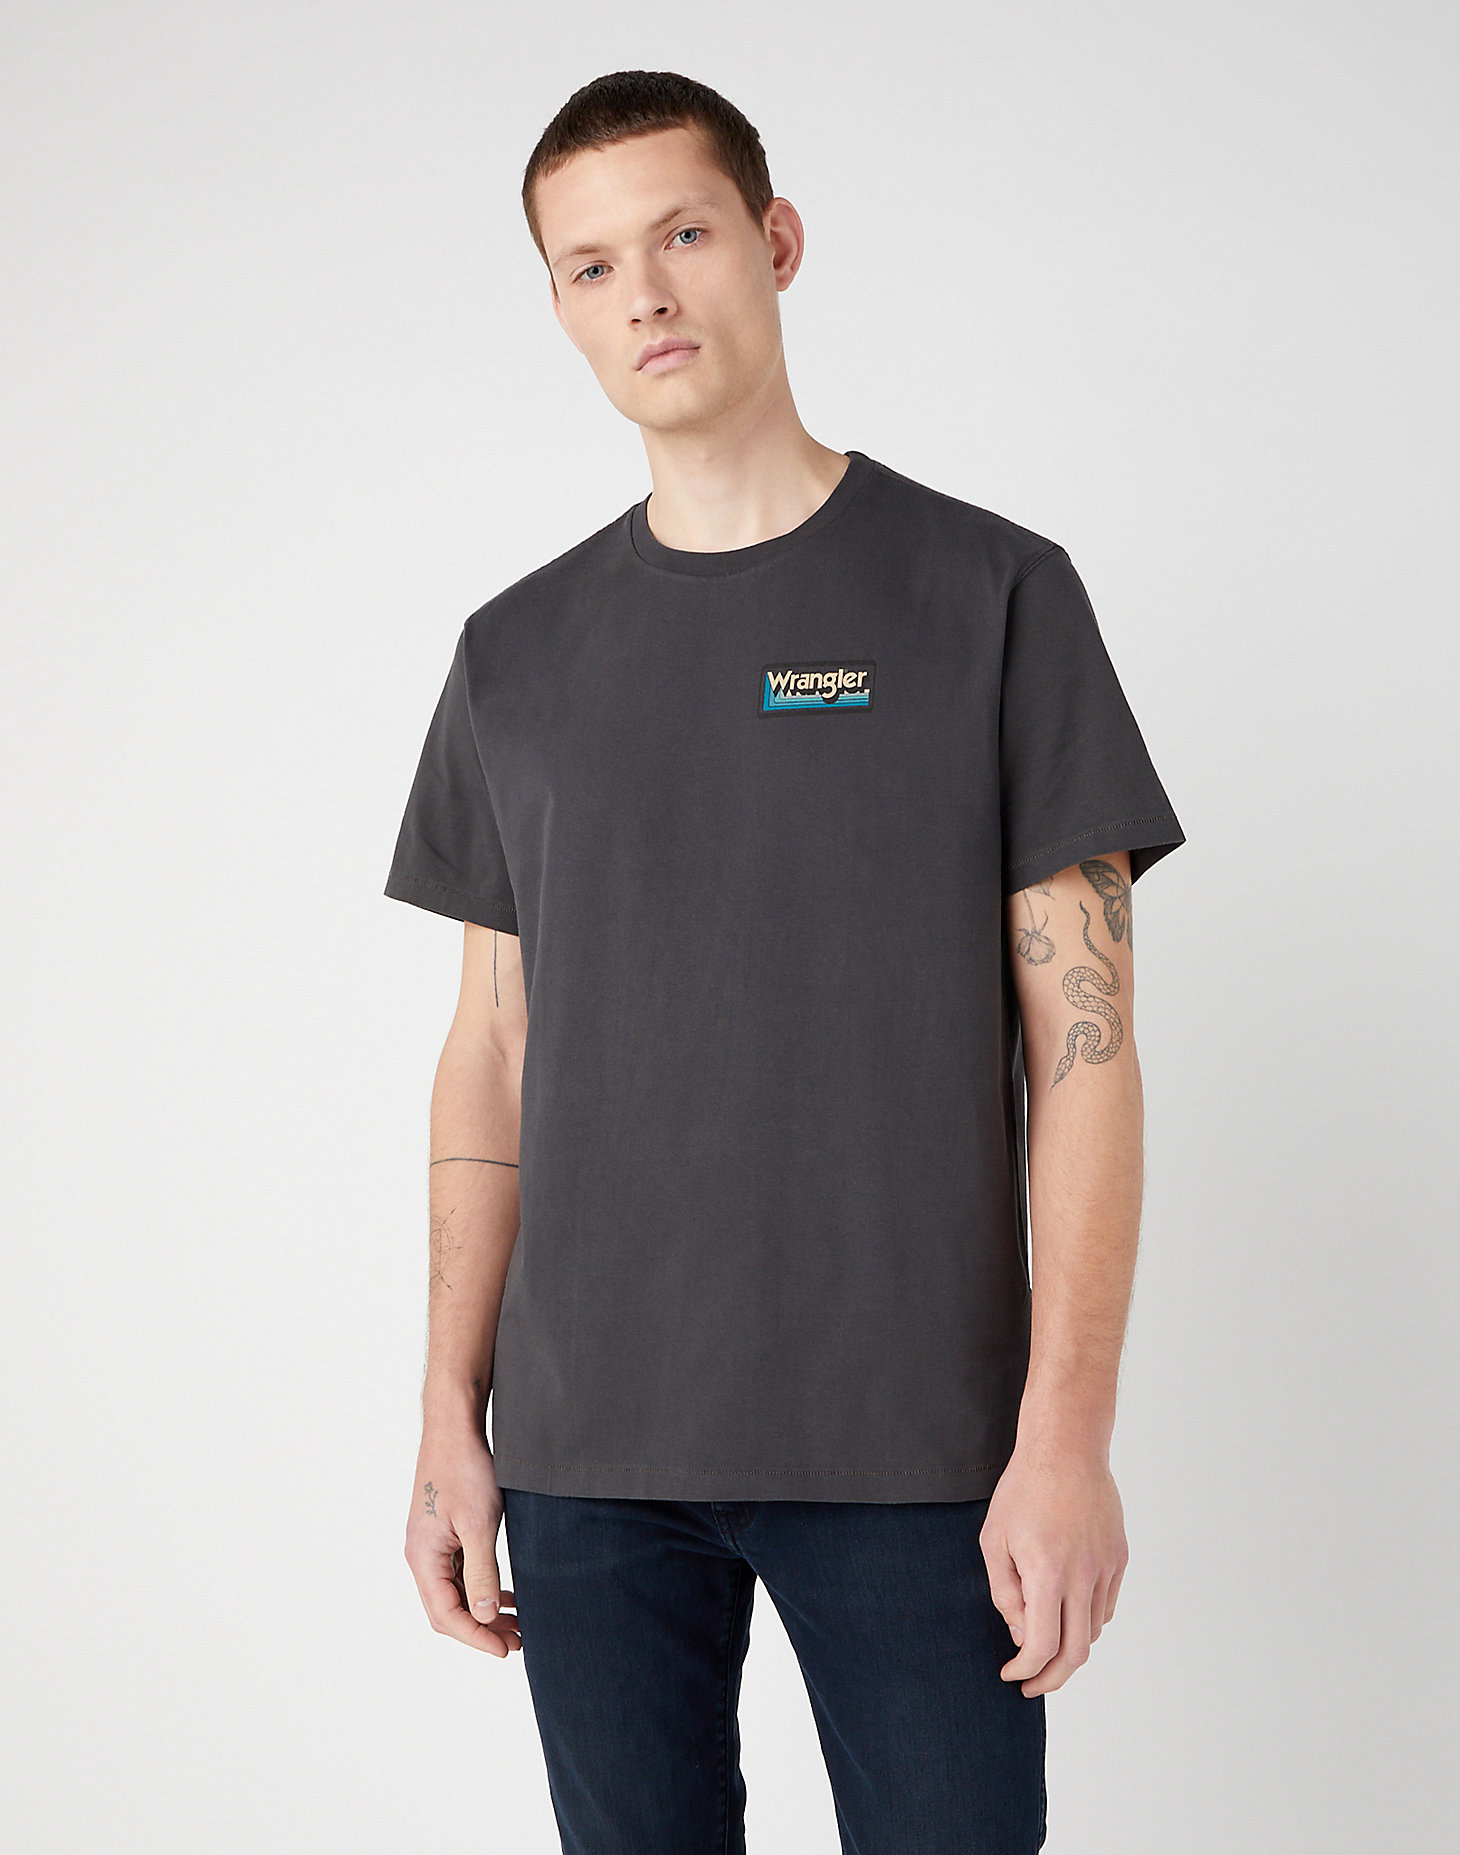 Graphic Tee in Faded Black alternative view 2